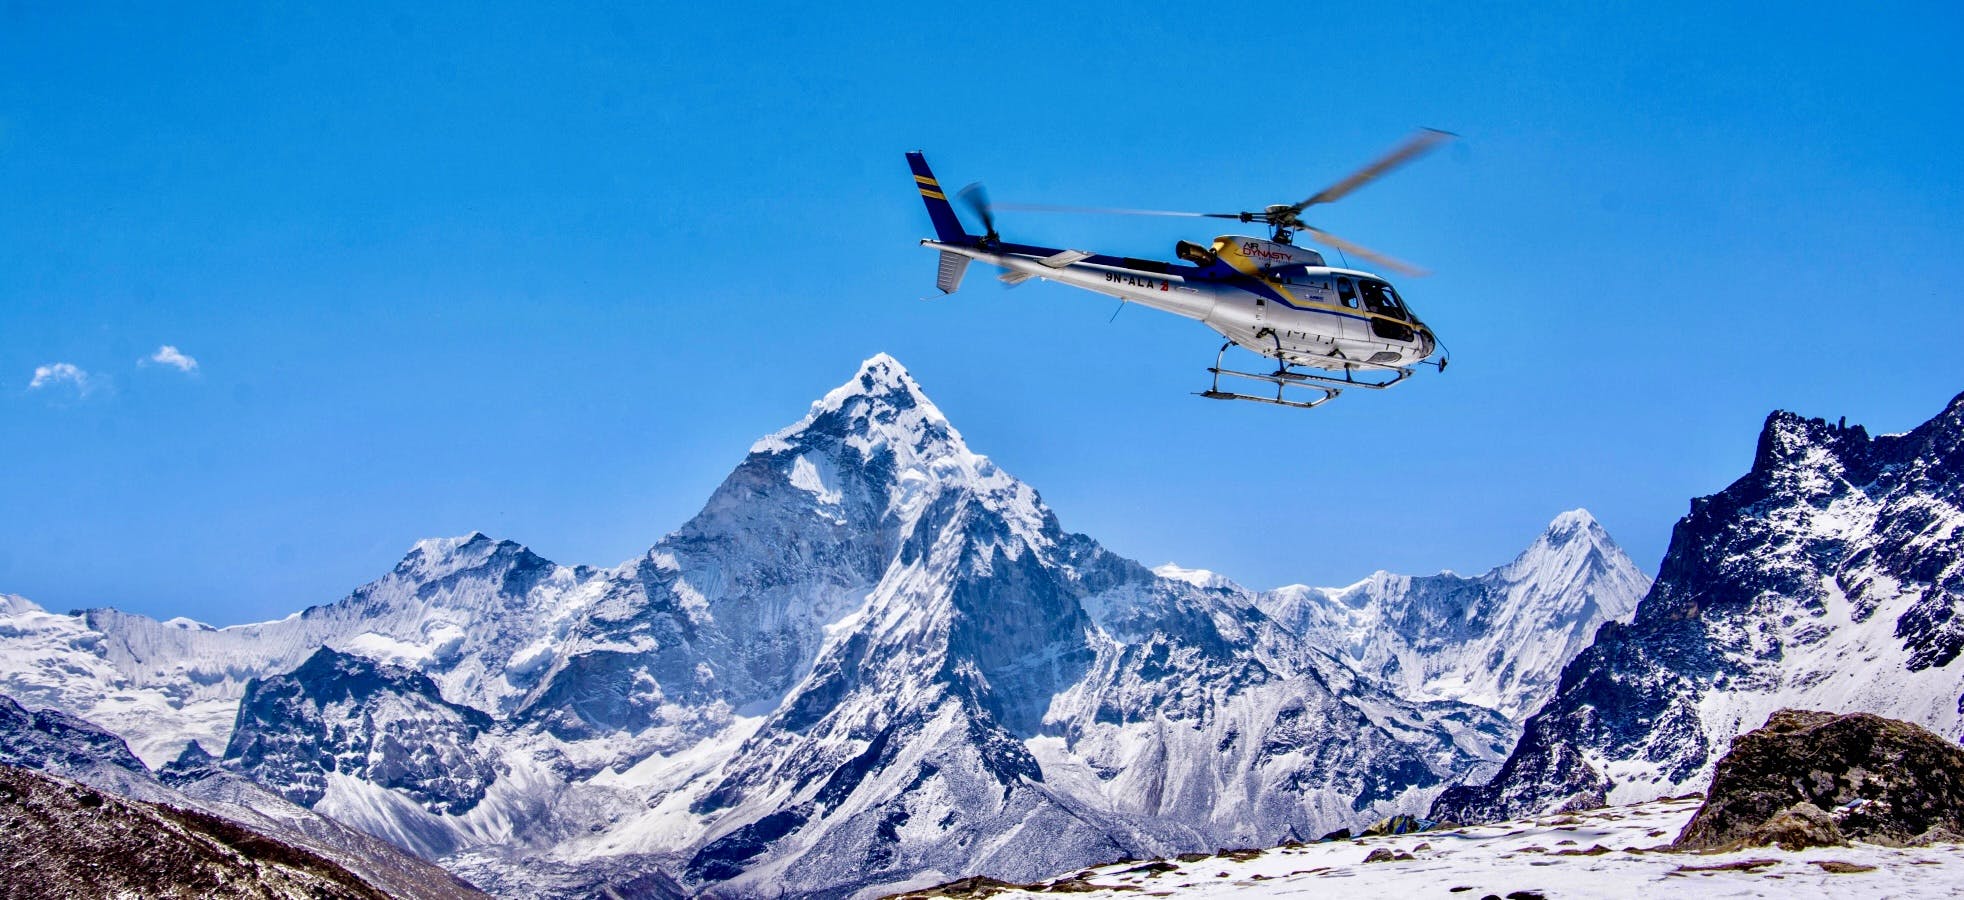 Money Worth and Best Value for Everest Helicopter Tour